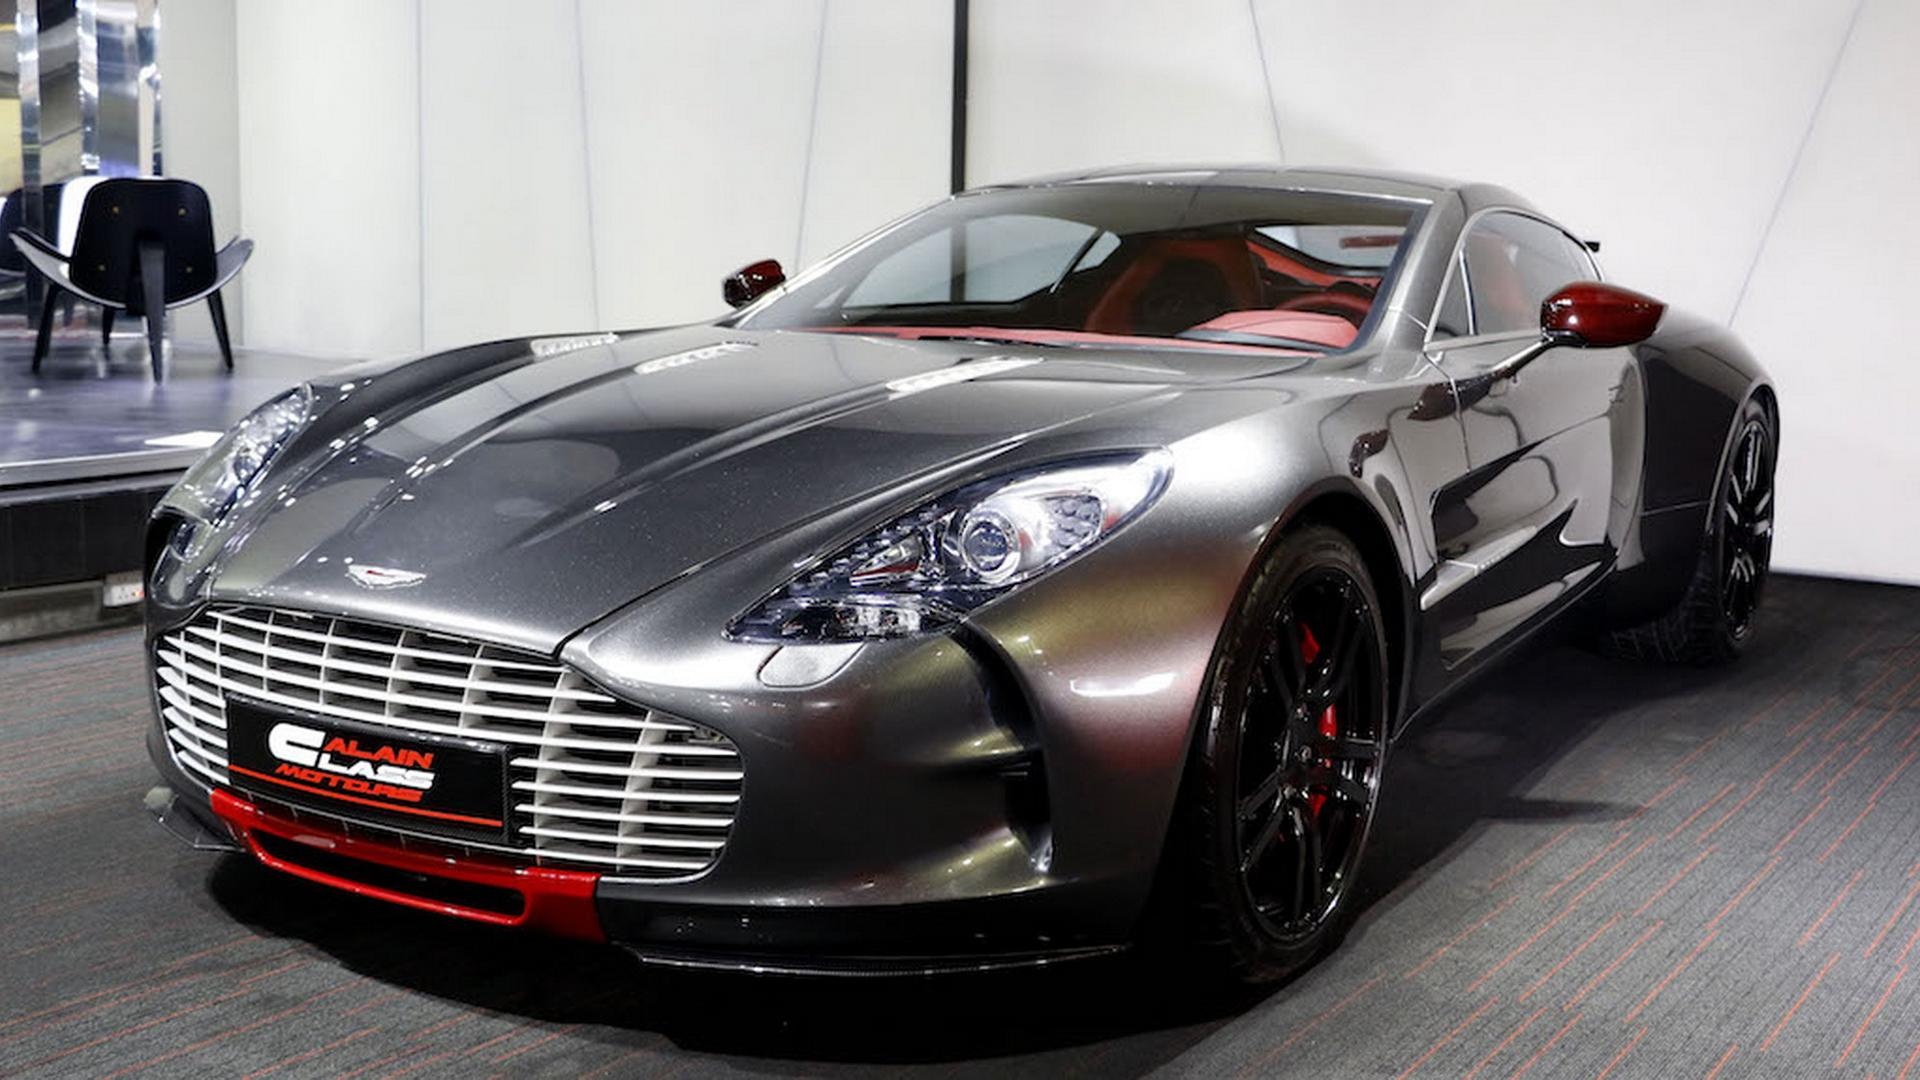 Aston Martin One-77, Rare Q series, Luxury car for sale, Barely used, 1920x1080 Full HD Desktop